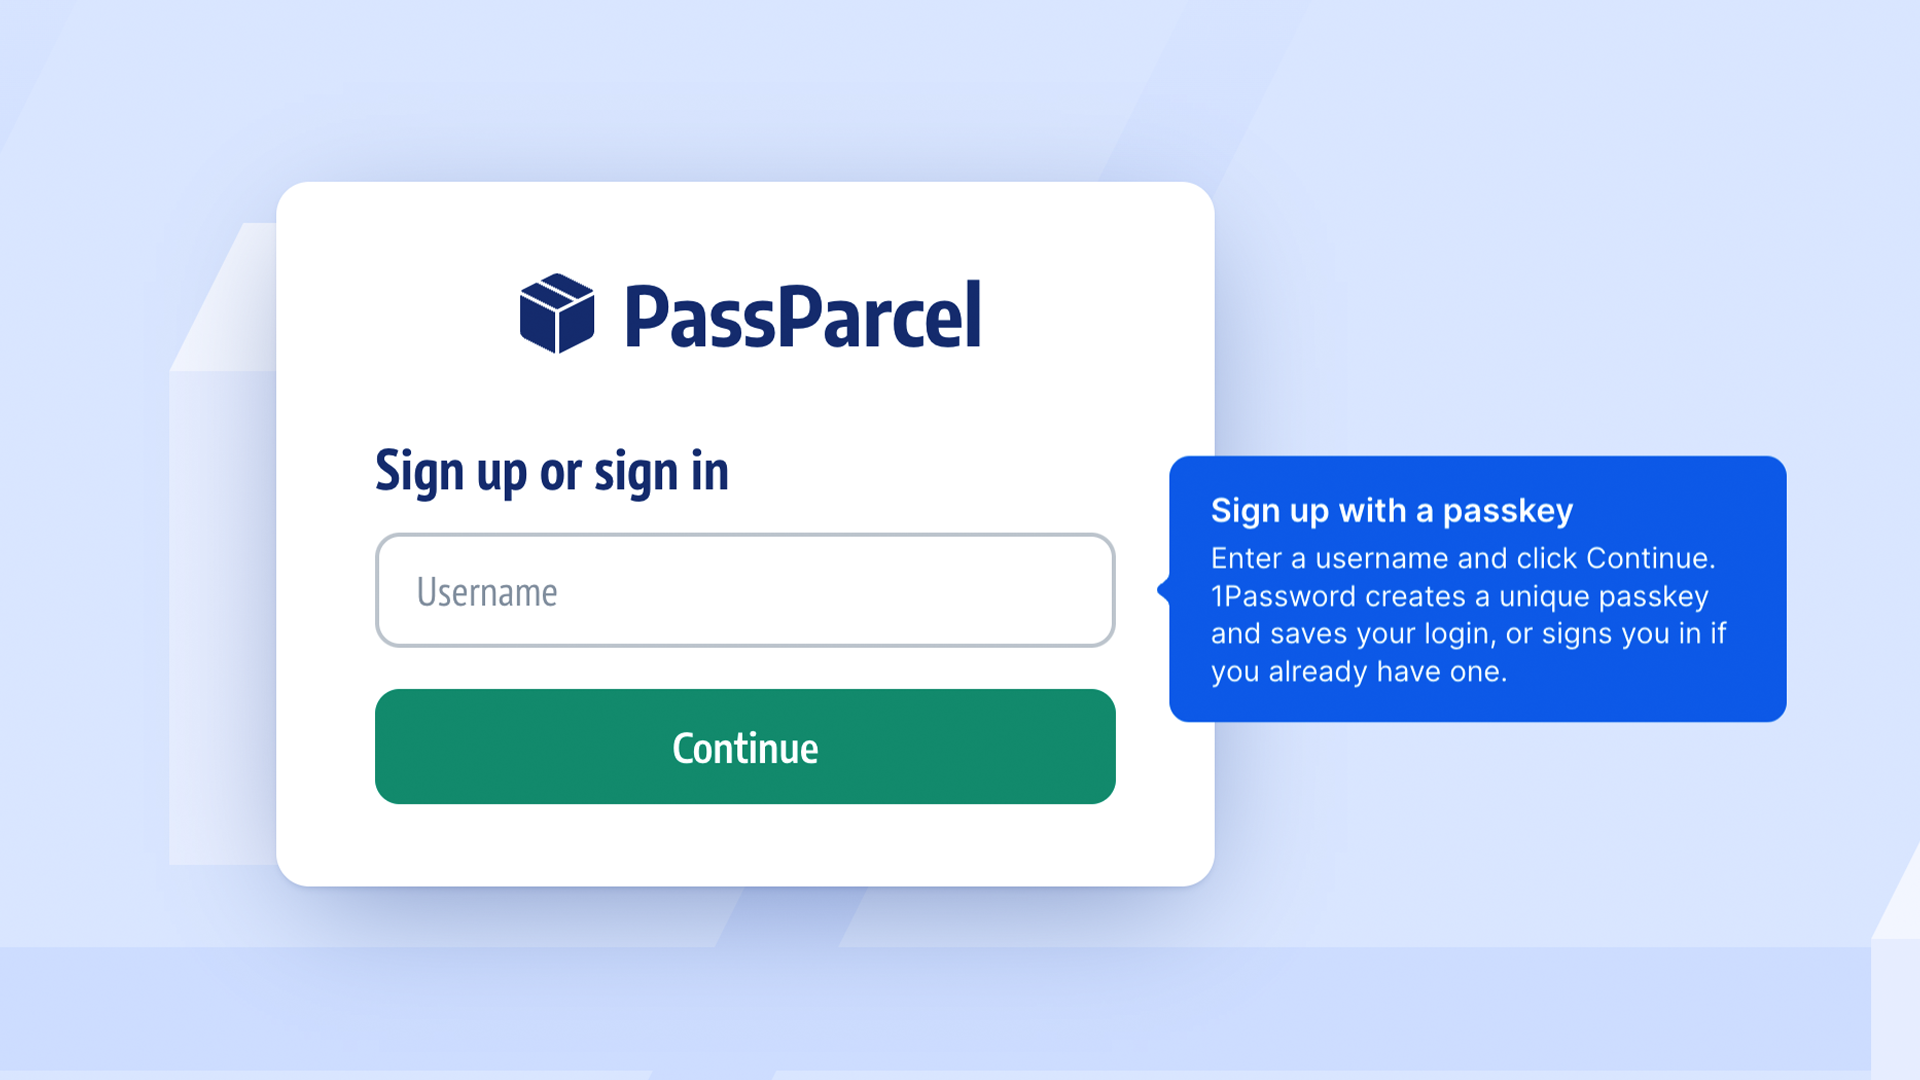 The The PassParcel demo asking me to sign up and create a passkey. The process is automatic, all I do is make a username.